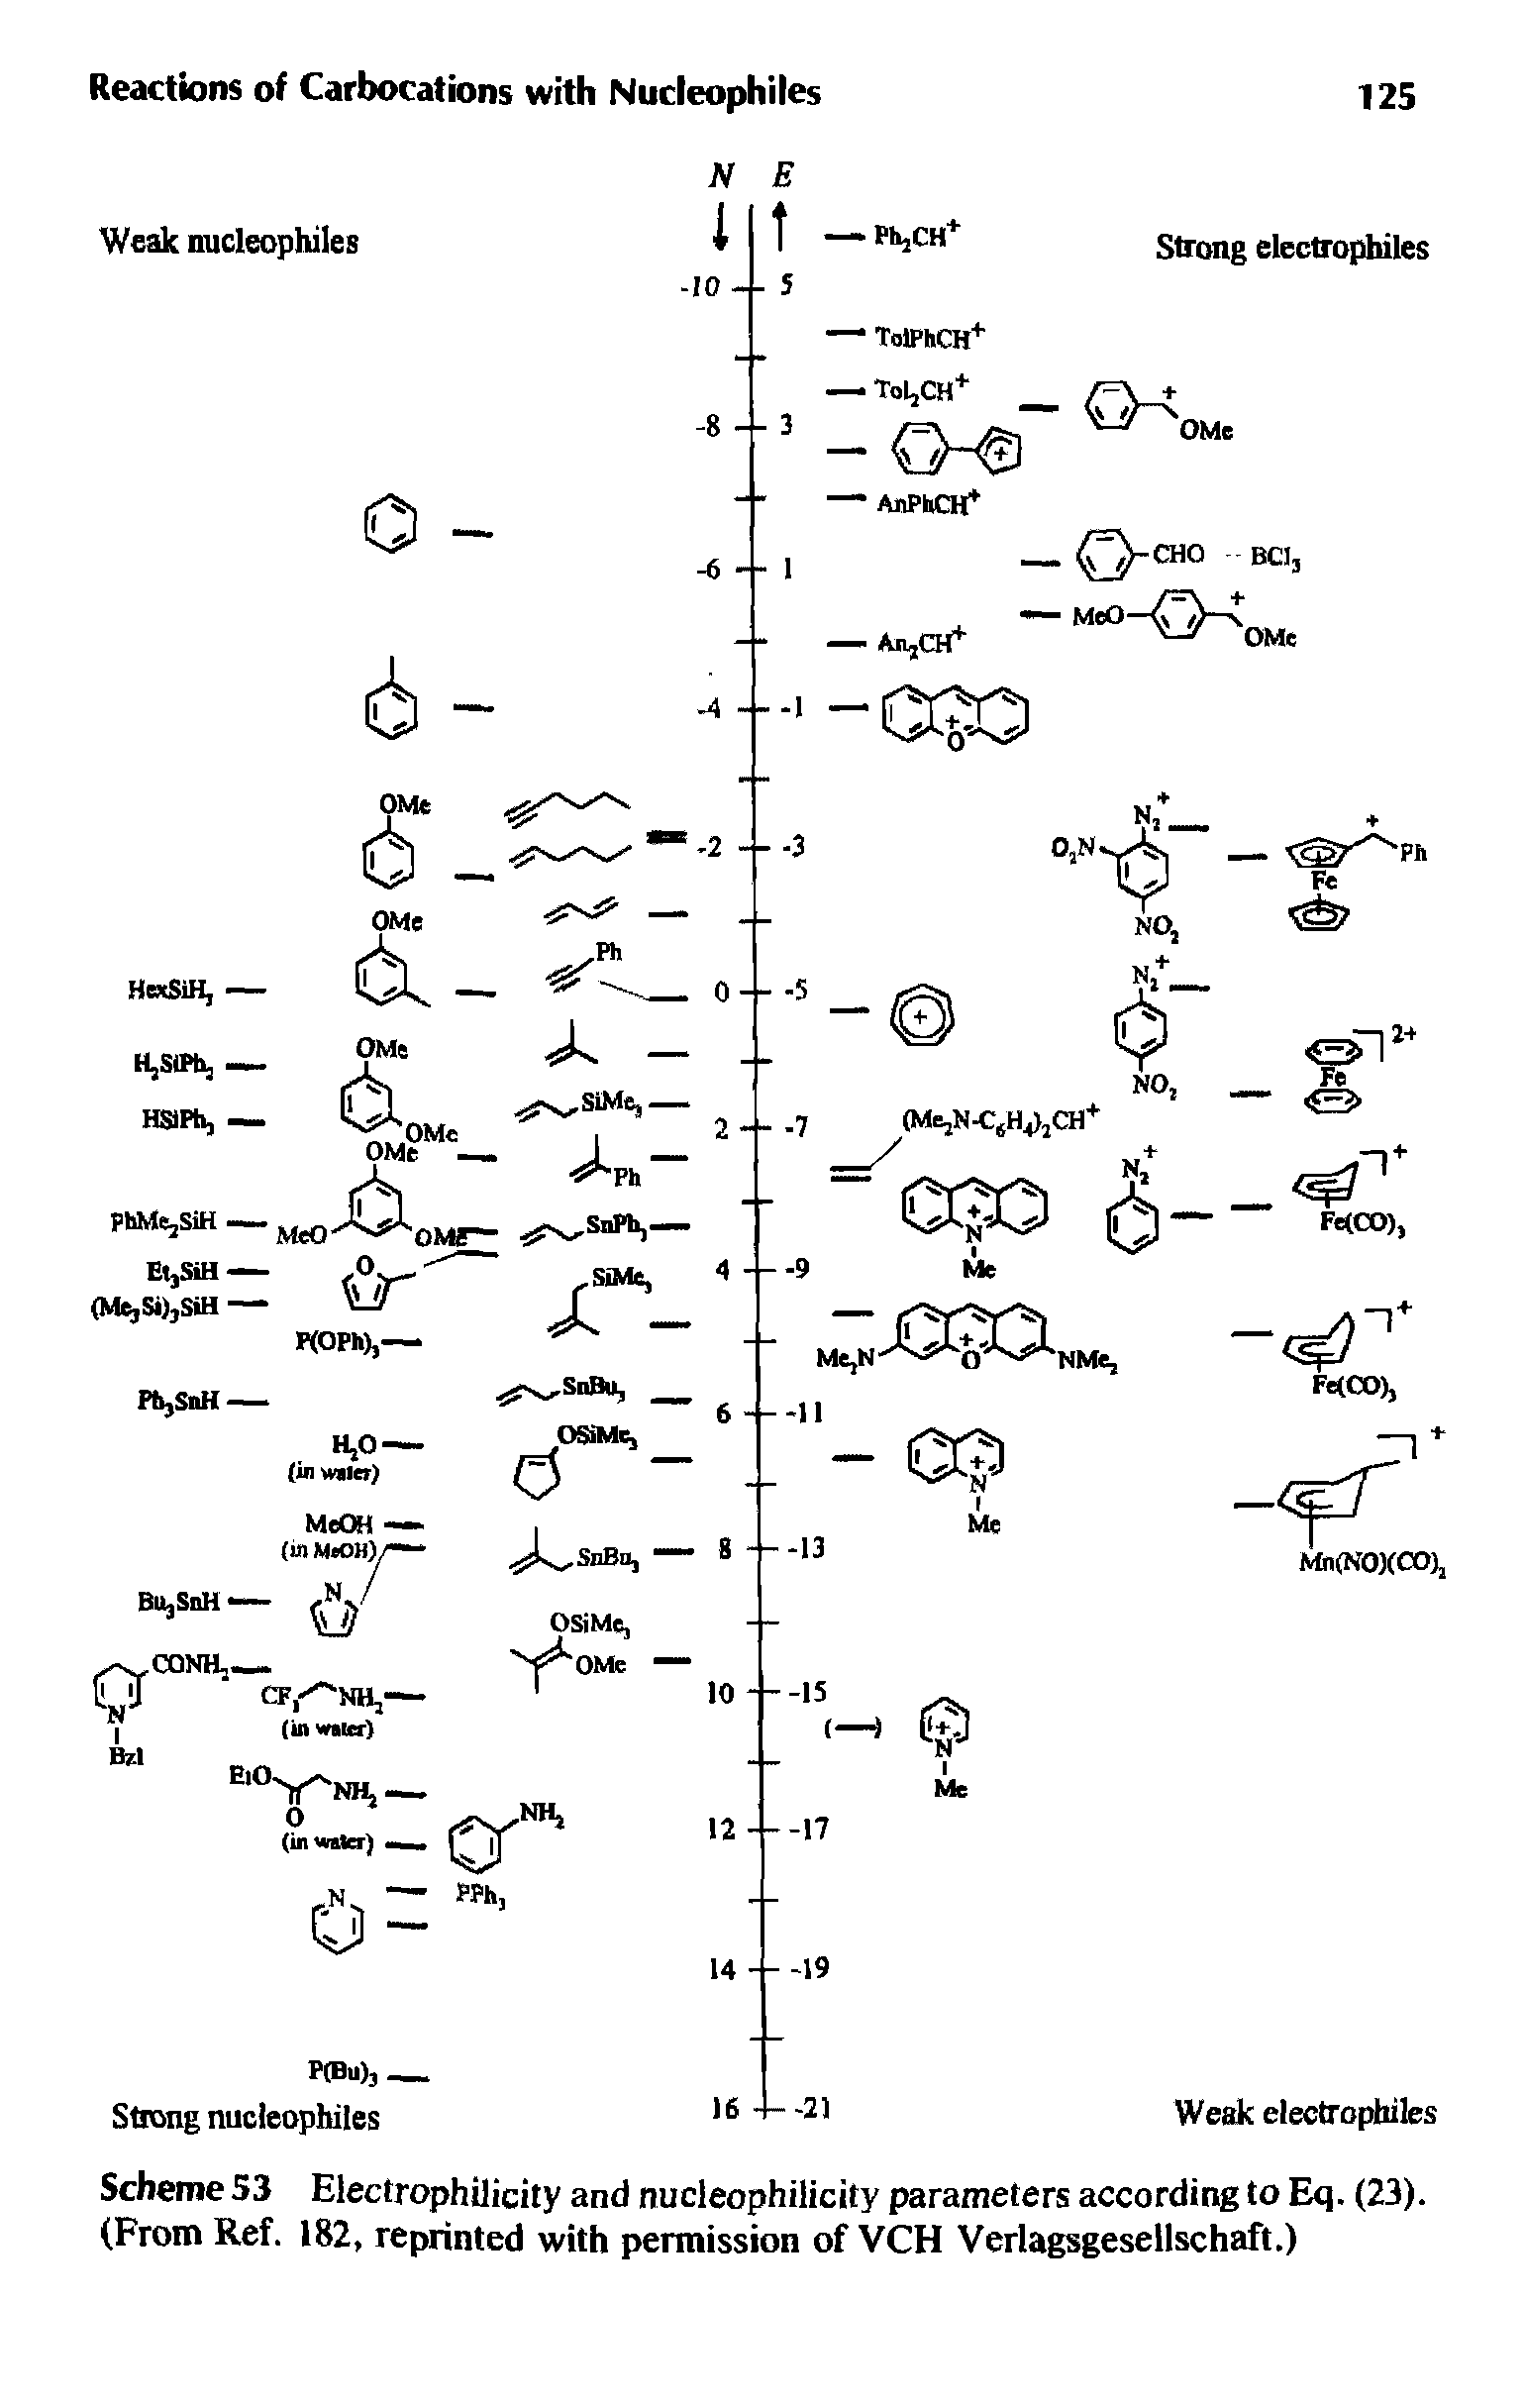 Scheme 53 Electrophilicity and nucleophilicity parameters according to Eq. (23). (From Ref. 182, reprinted with permission of VCH Verlagsgesellschaft.)...